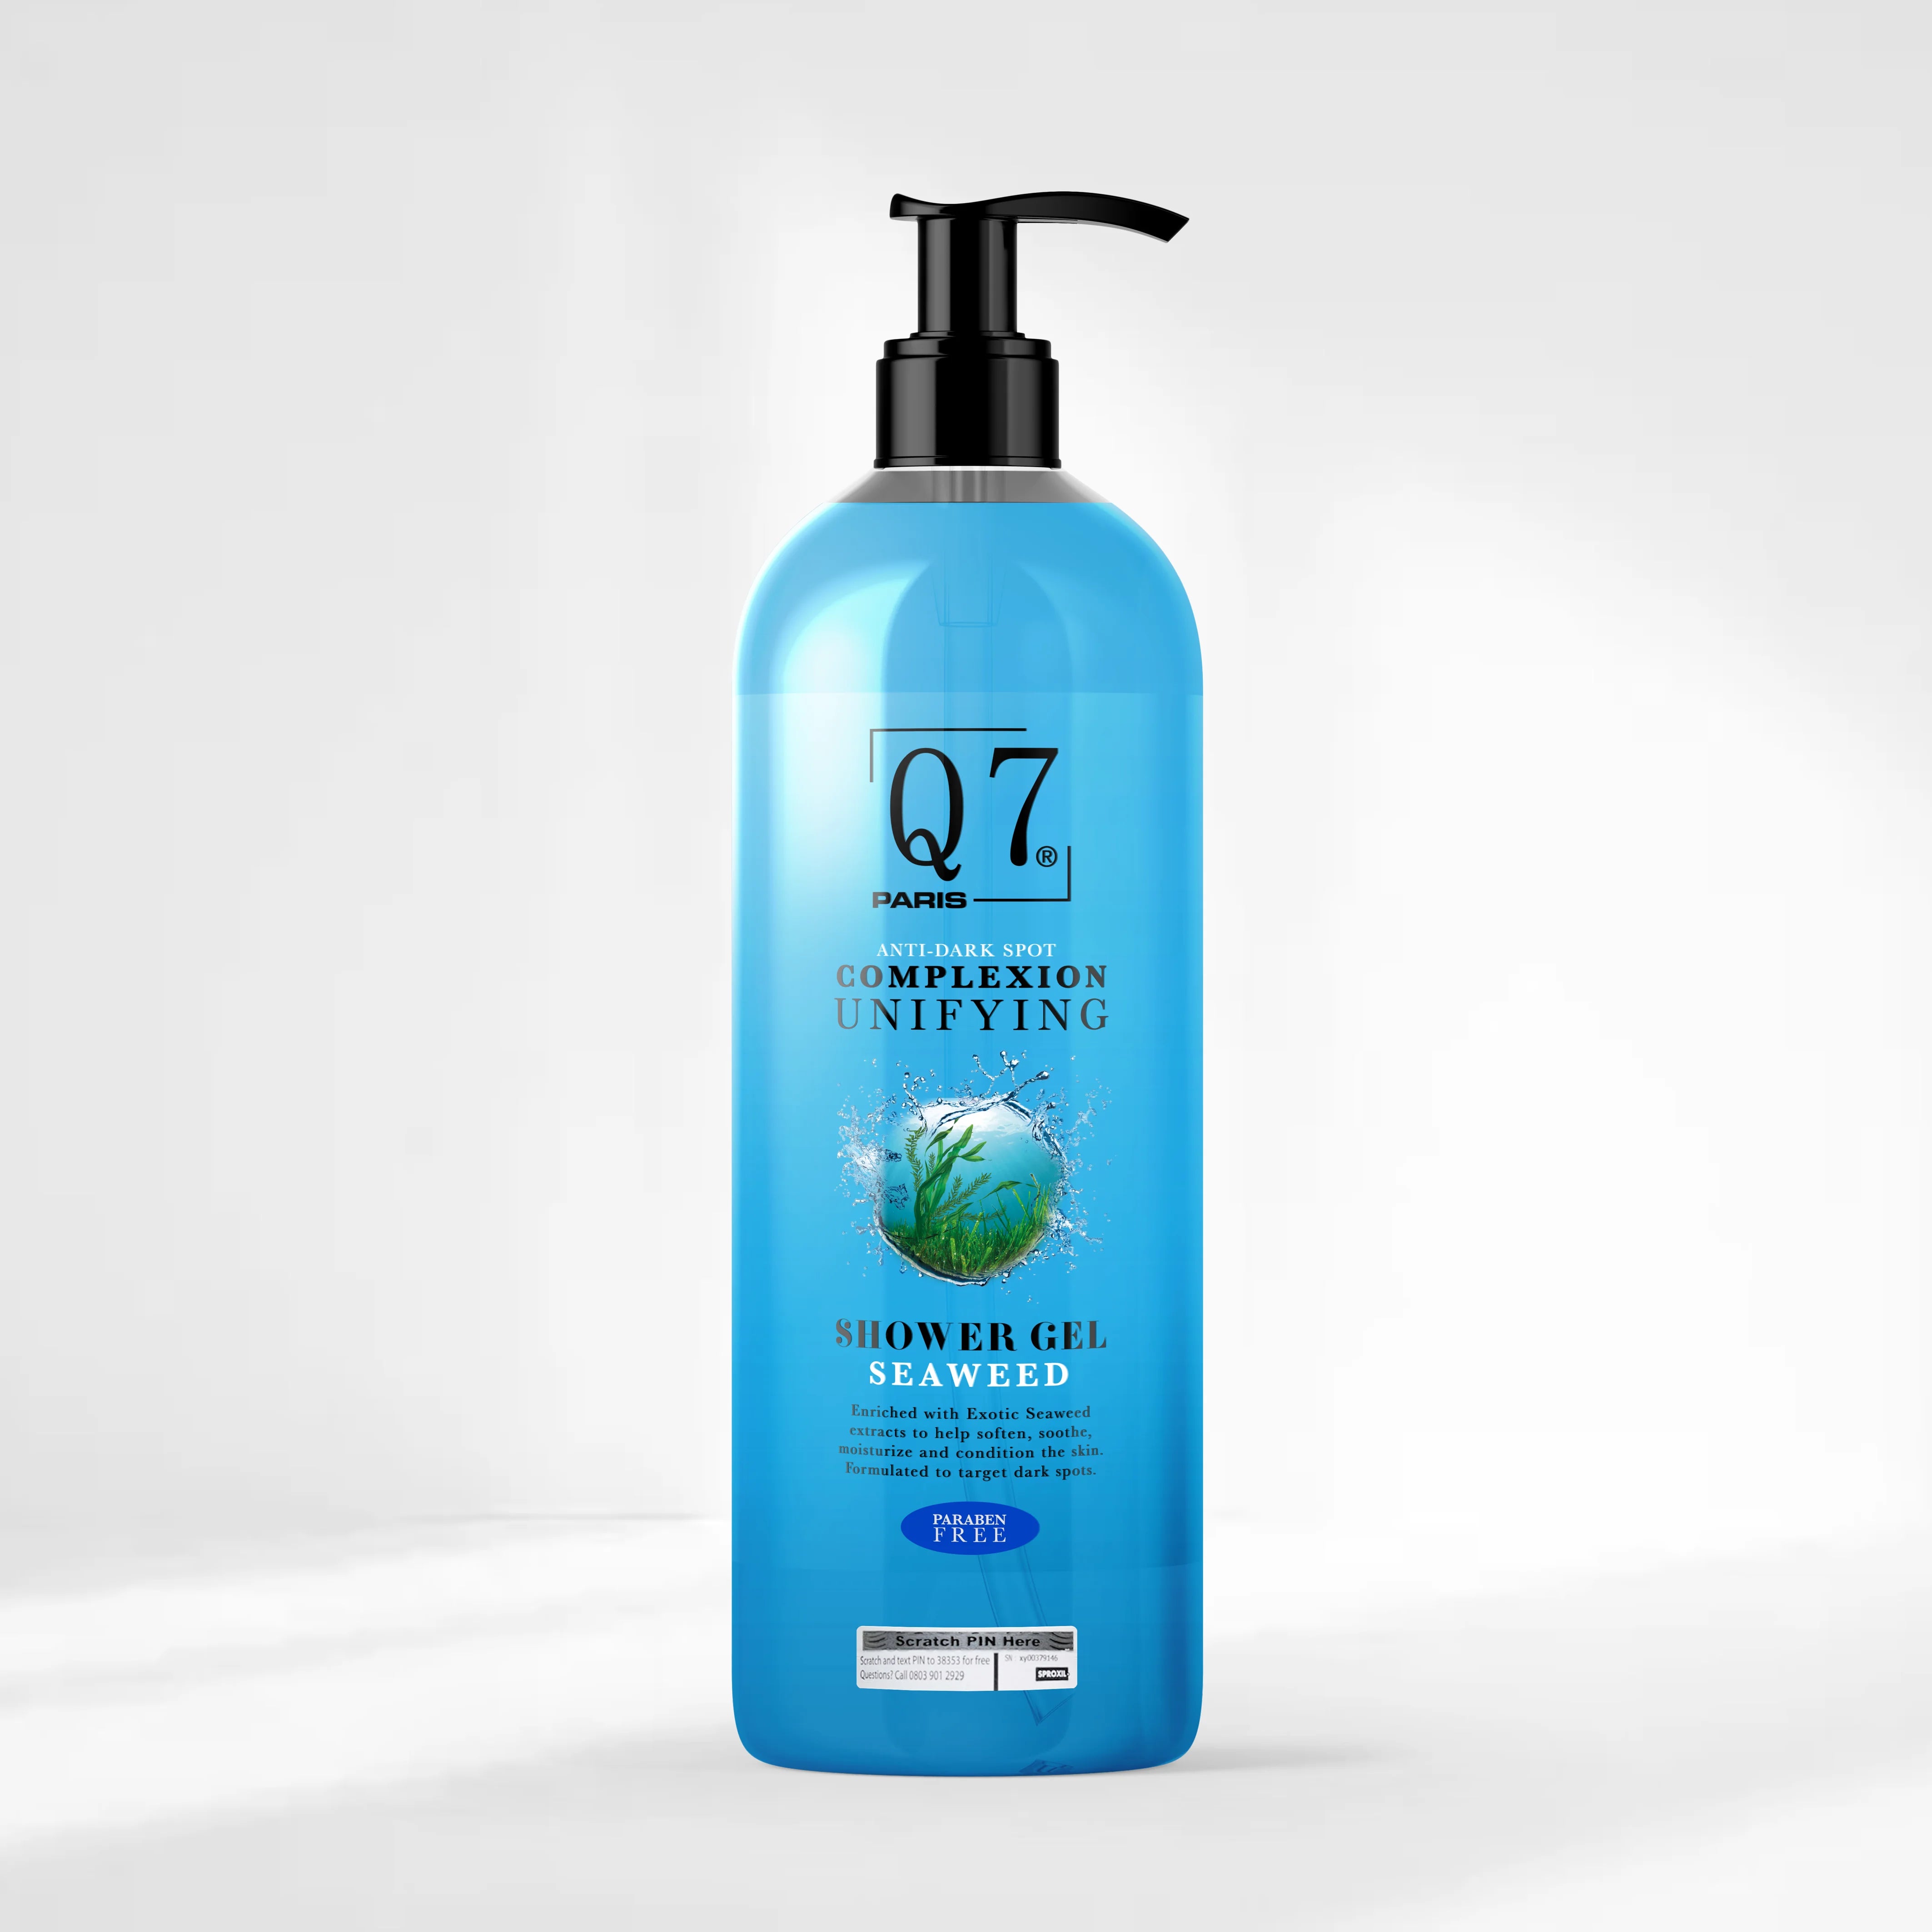 Q7Paris Anti-Dark Spot Complexion Unifying Shower Gel: with Seaweed and Licorice - 1000ml